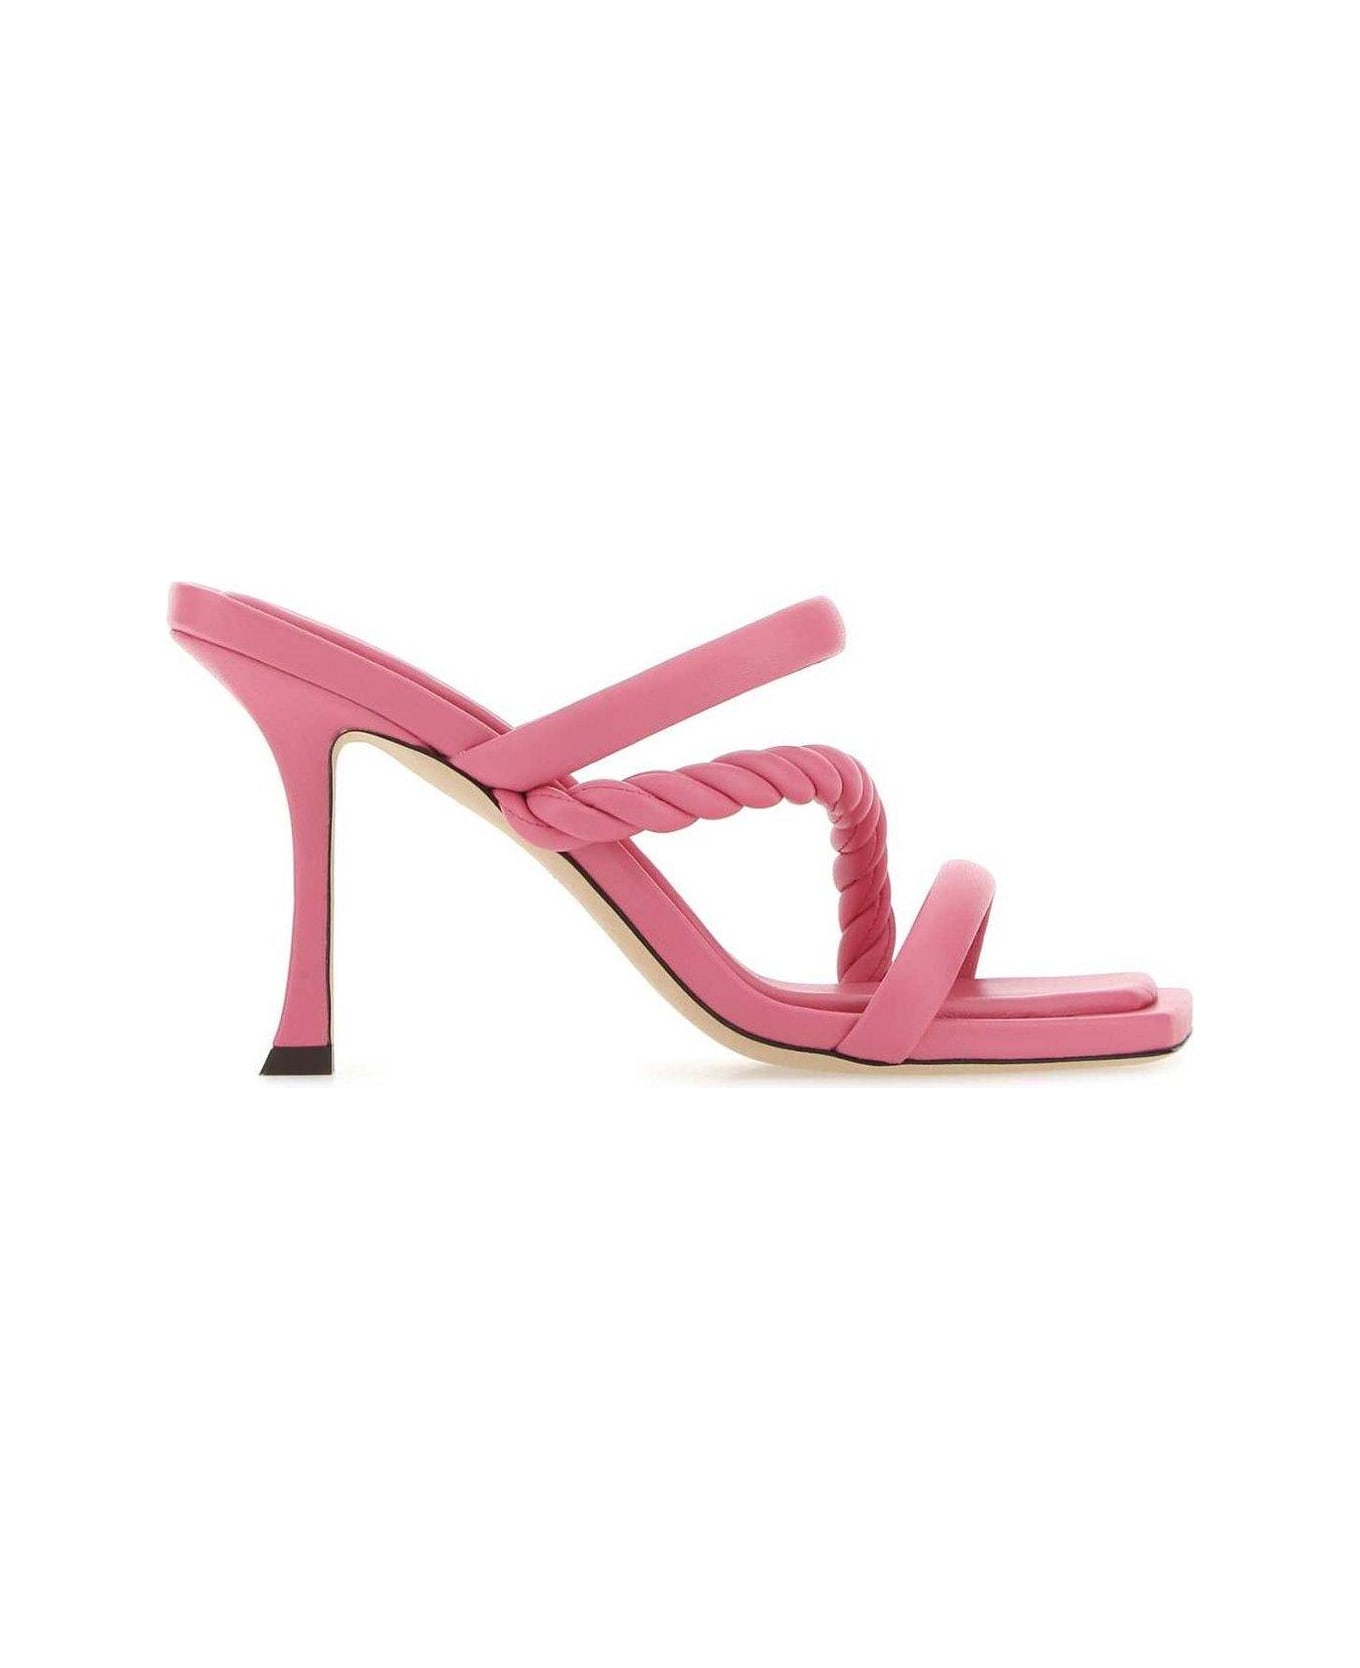 Jimmy Choo Diosa 90 Sandals - Candy Pink